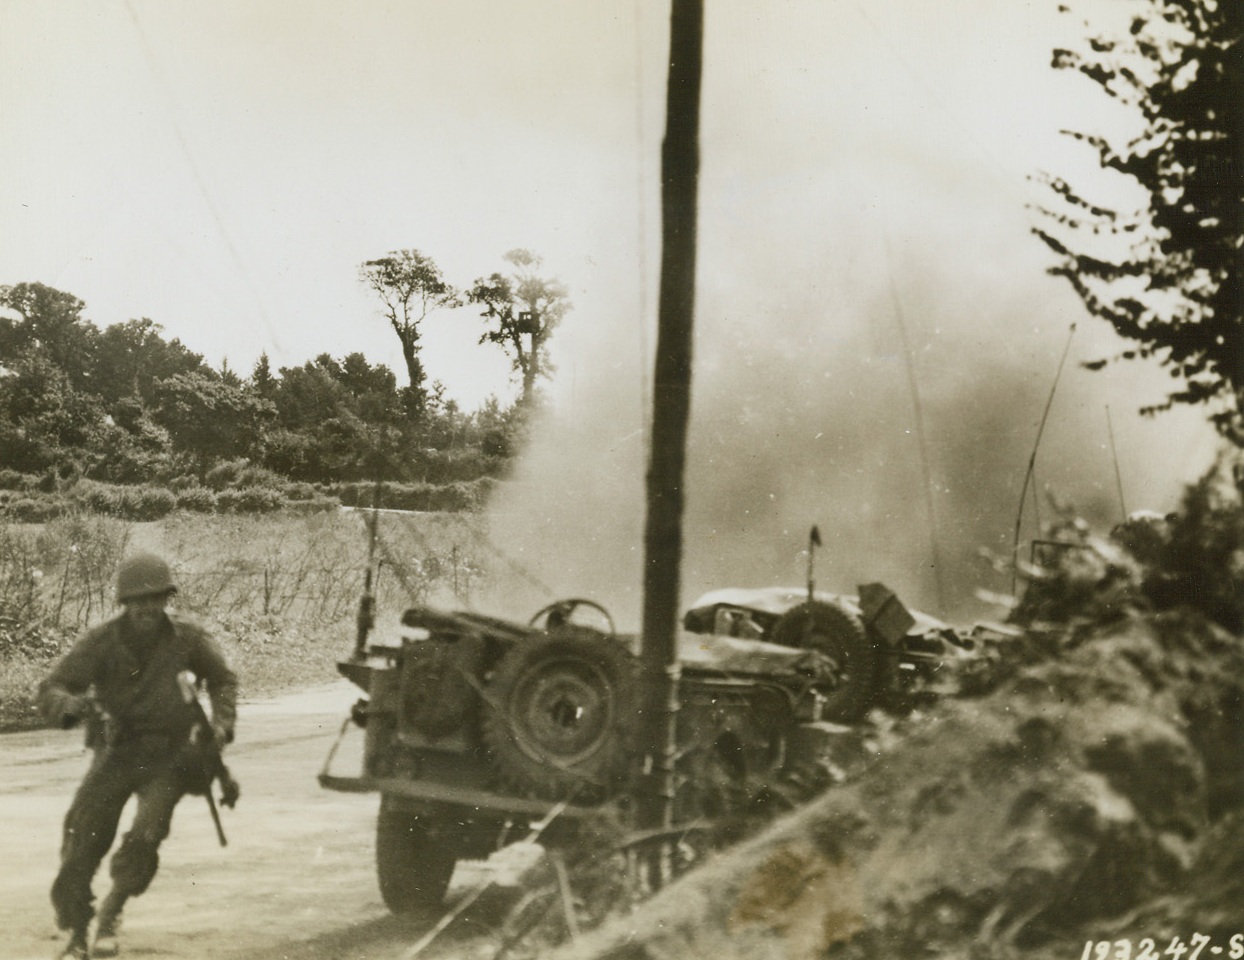 YANK INFANTRY COLUMN ENEMY TARGET, 9/5/1944. FRANCE – An American soldier dashes for cover as vehicles of U.S. column become target for Nazi guns in Brest, France. Smoke from near or direct hits on the column fills the area.Credit: Signal Corps photo from Acme;